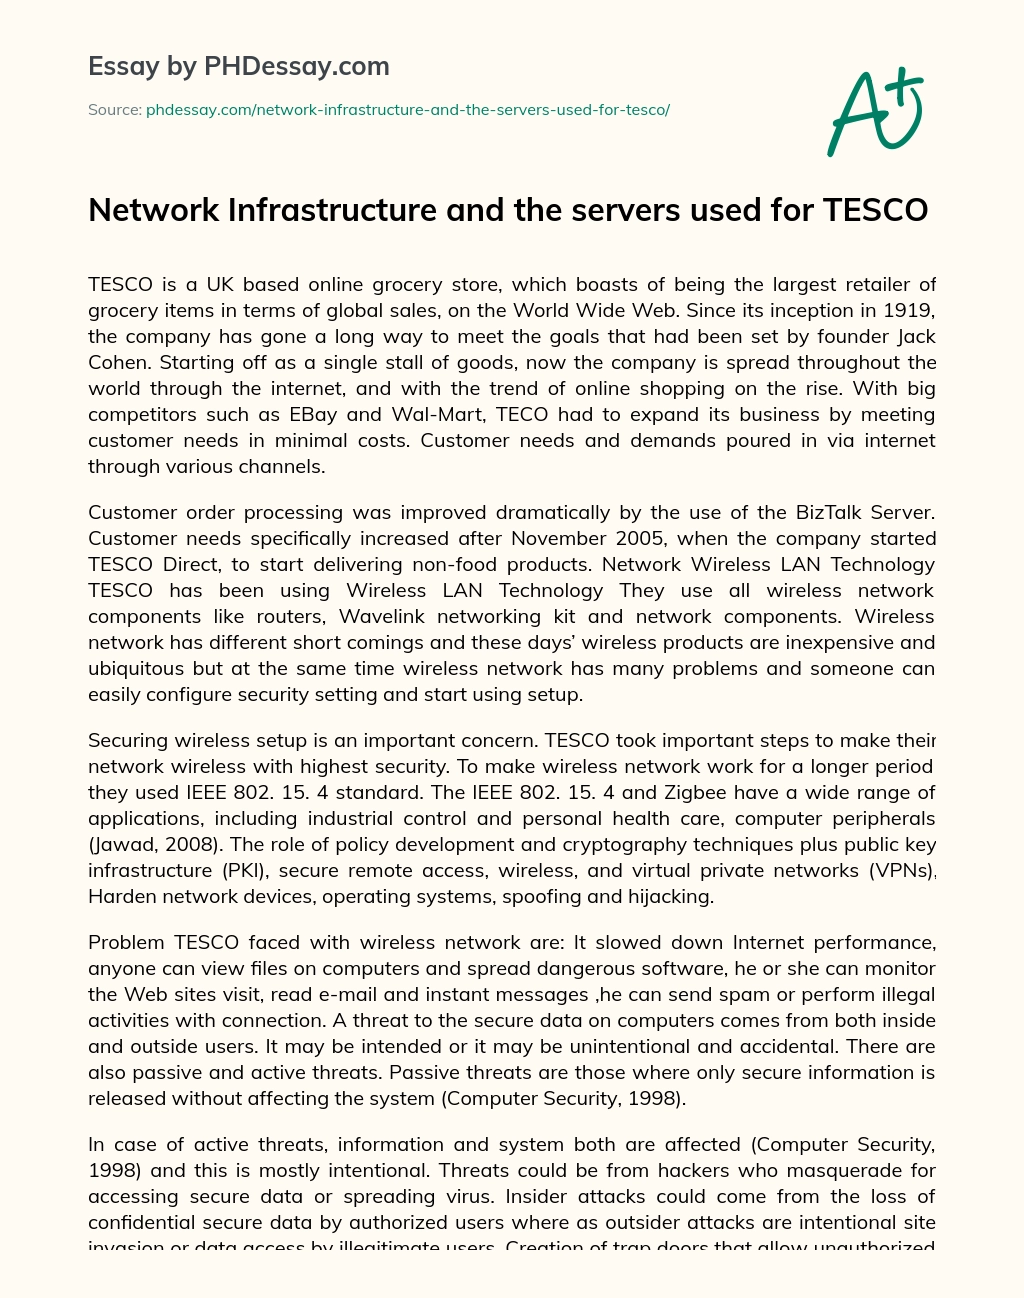 Network Infrastructure and the servers used for TESCO essay